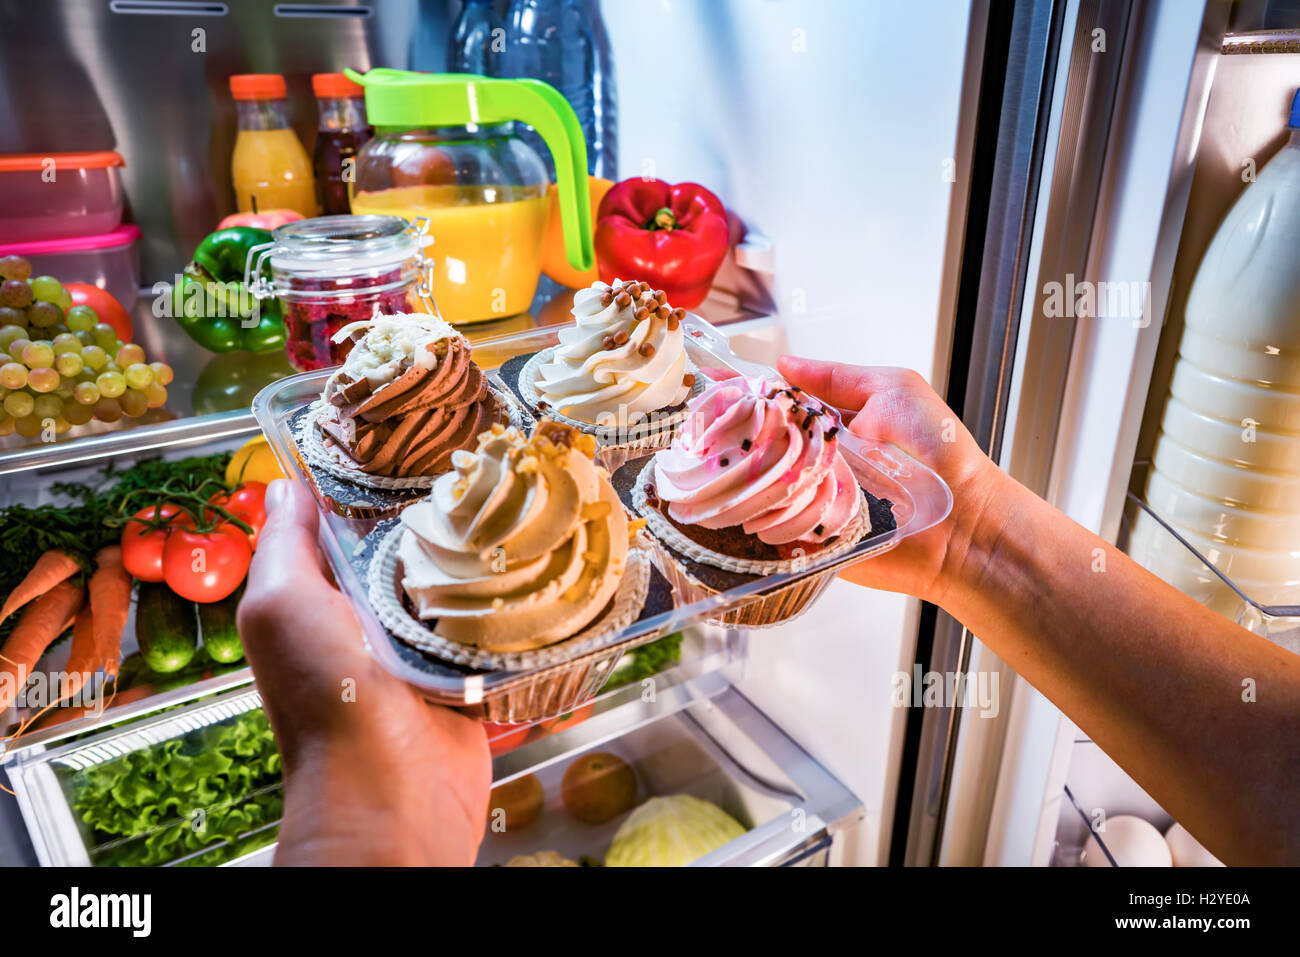 Woman takes the sweet cake from the open refrigerator Stock Photo